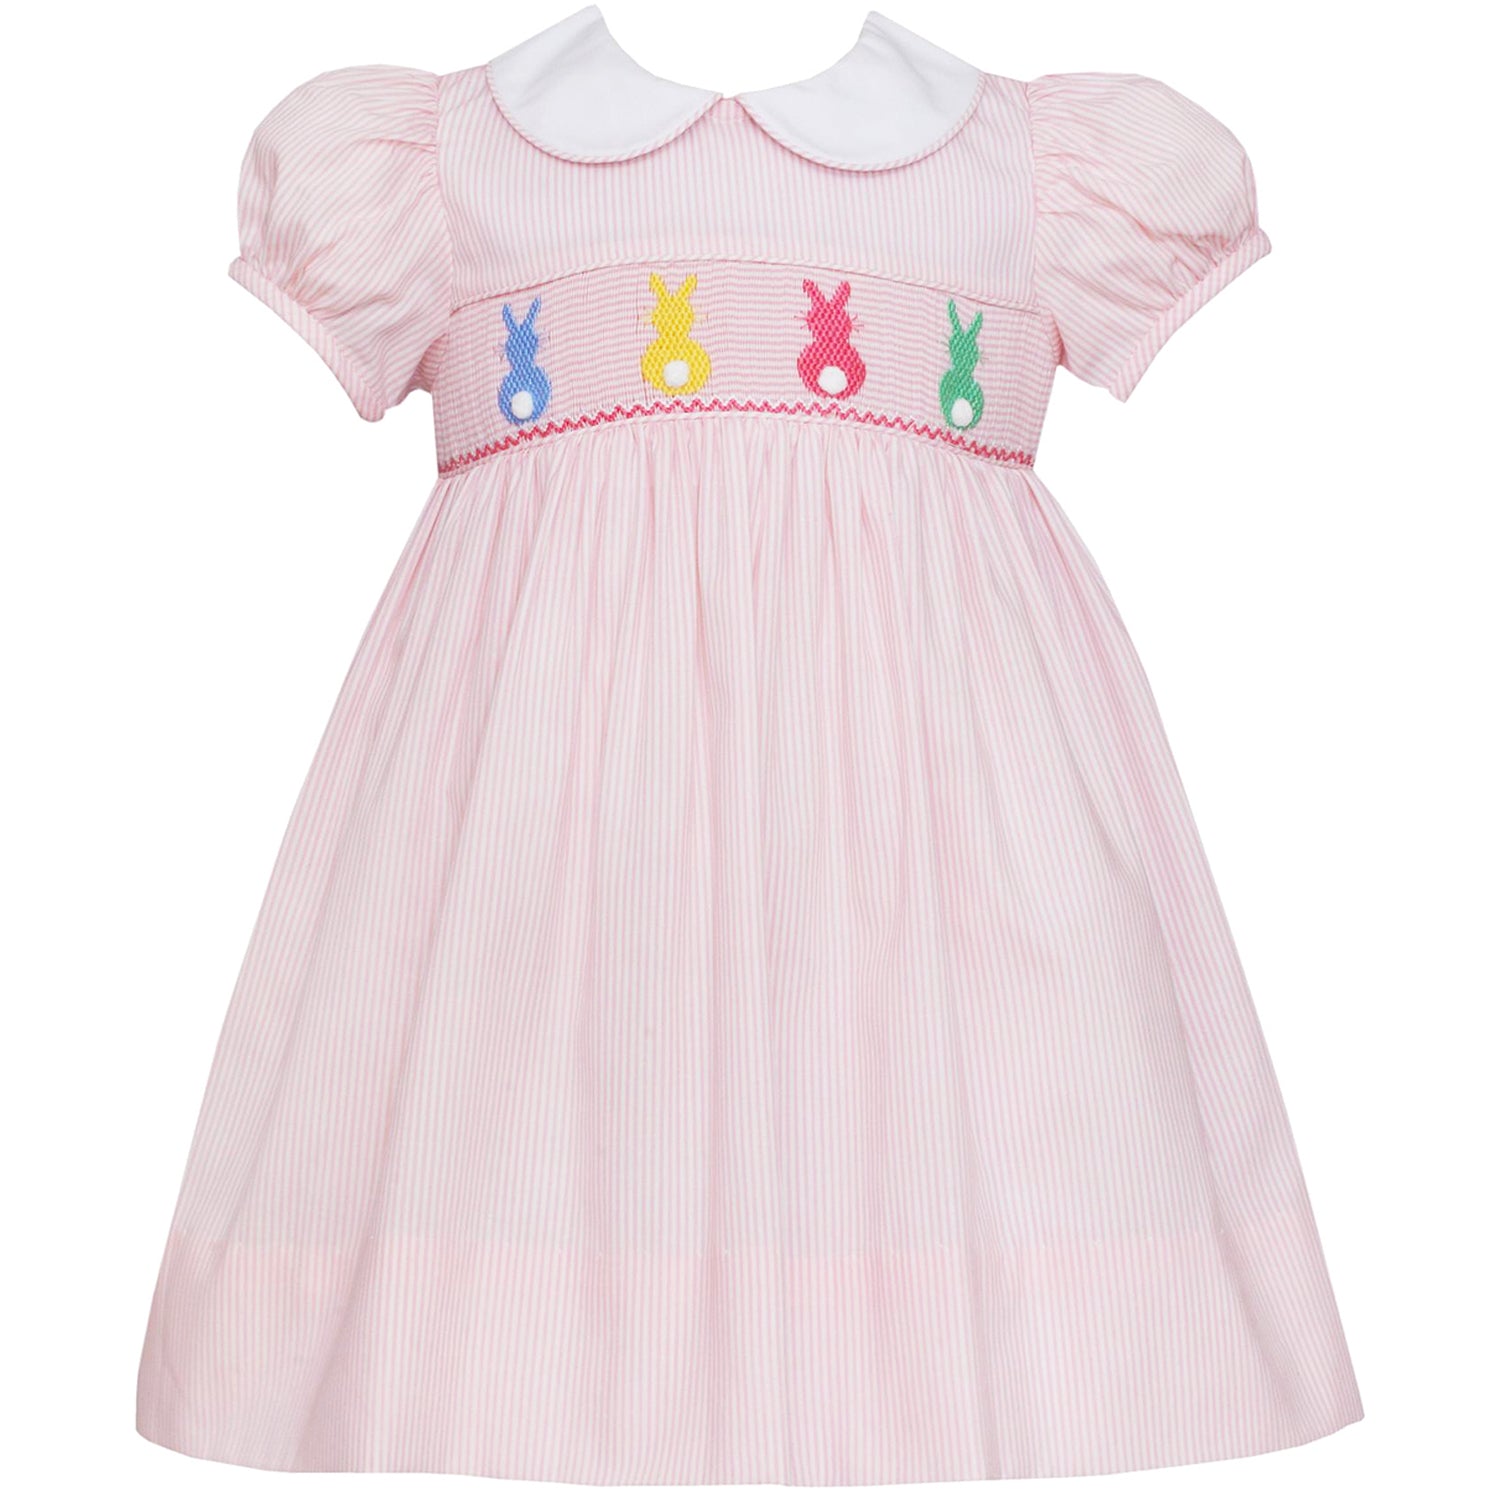 Light Pink Cottontails Smocked Dress w/ Collar